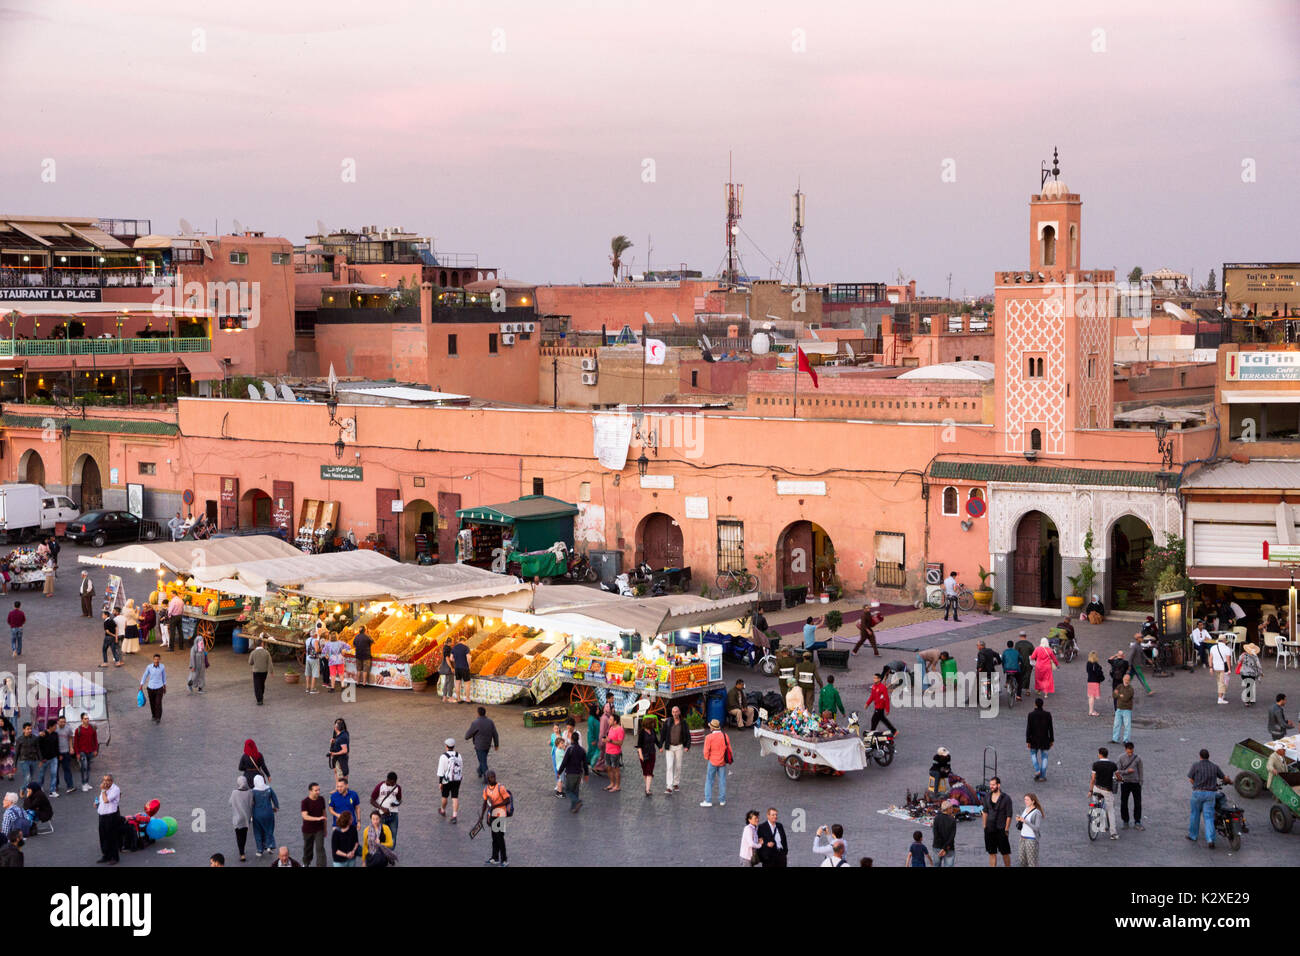 MARRAKESH, MOROCCO - APR 29, 2016: Mosque and restaurants with tourists near the souks on the Djemaa-el-Fna square in Marrakesh. Stock Photo